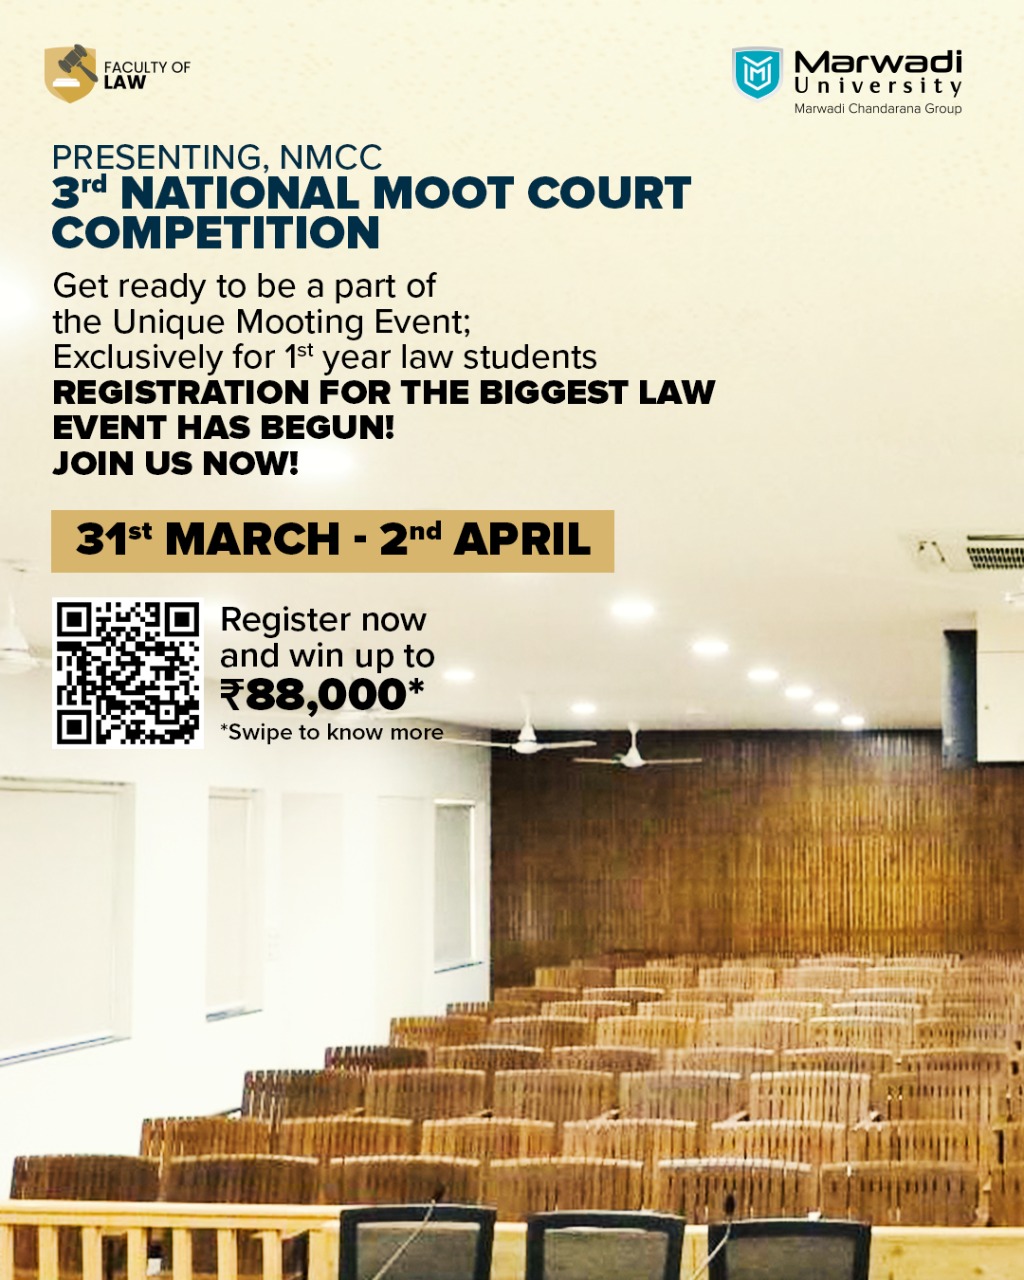 3rd NATIONAL MOOT COURT COMPETITION